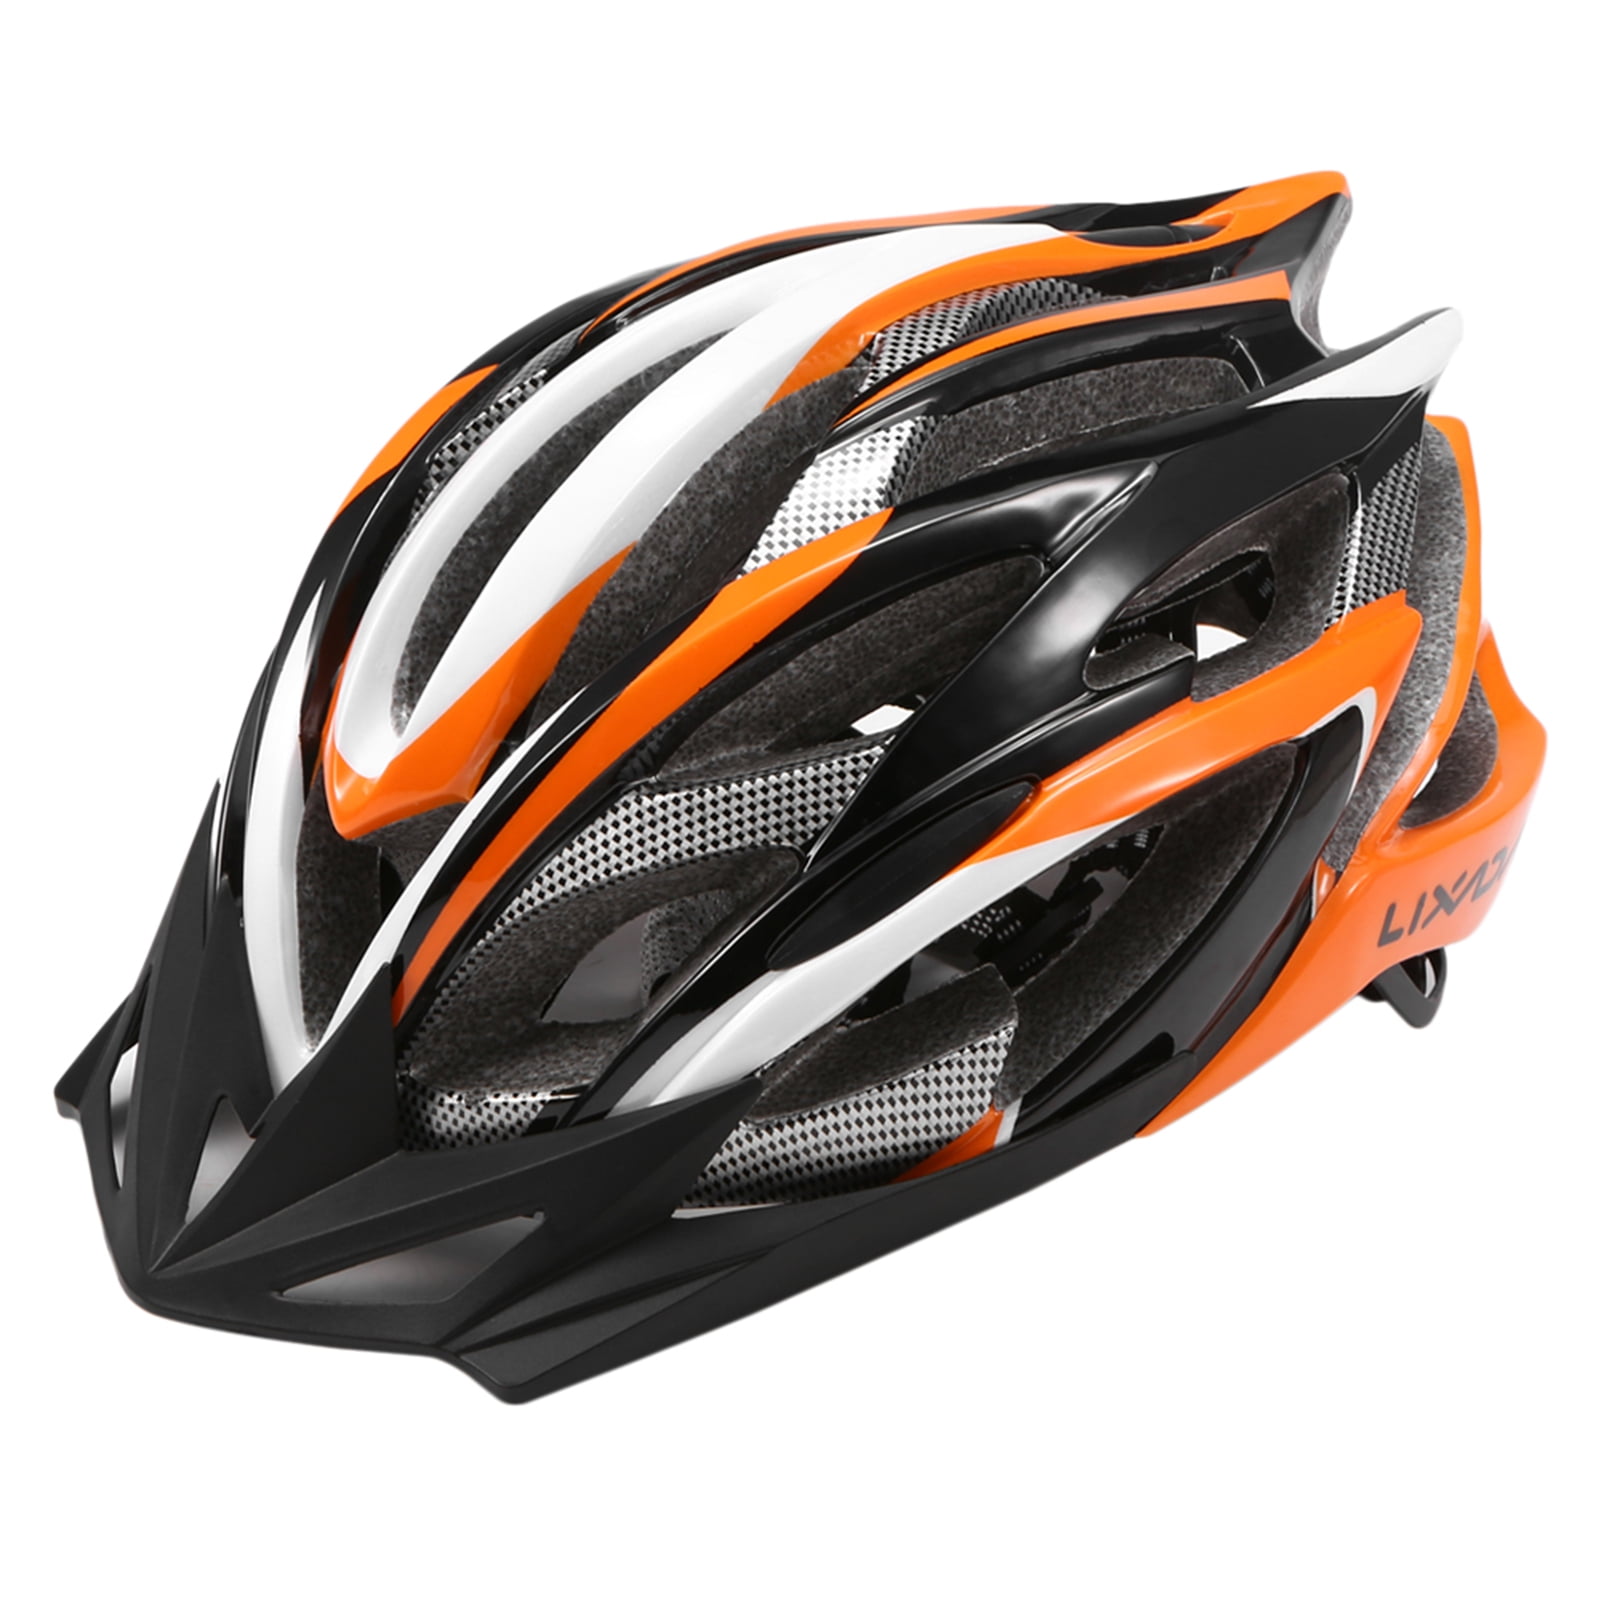 Details about   MTB Road Bike Mountain Bicycle Cycling Helmets Sports Men Protect Helmet Visor 